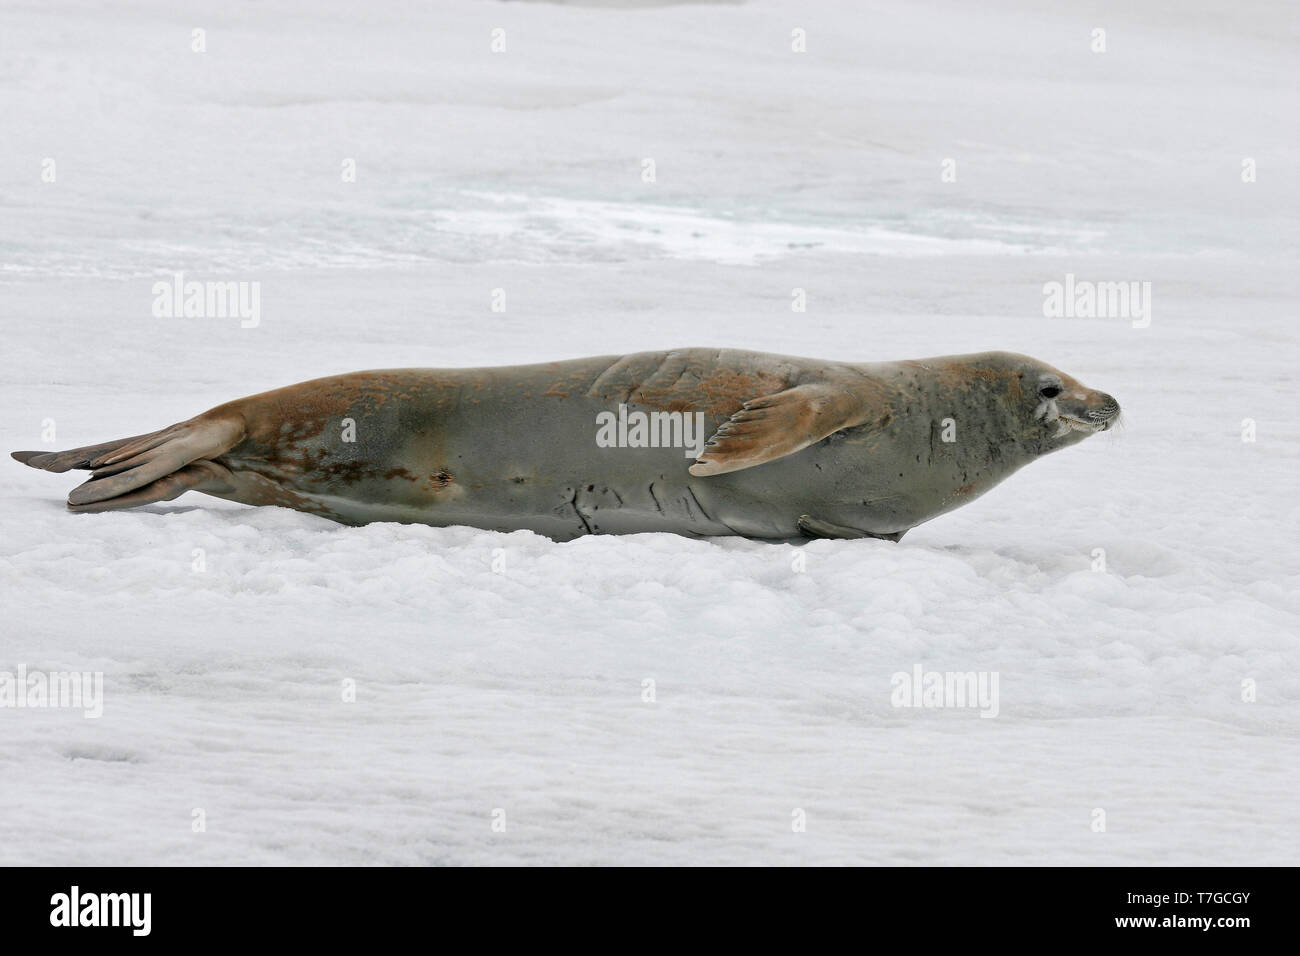 Crabeater seal perched on ice Stock Photo